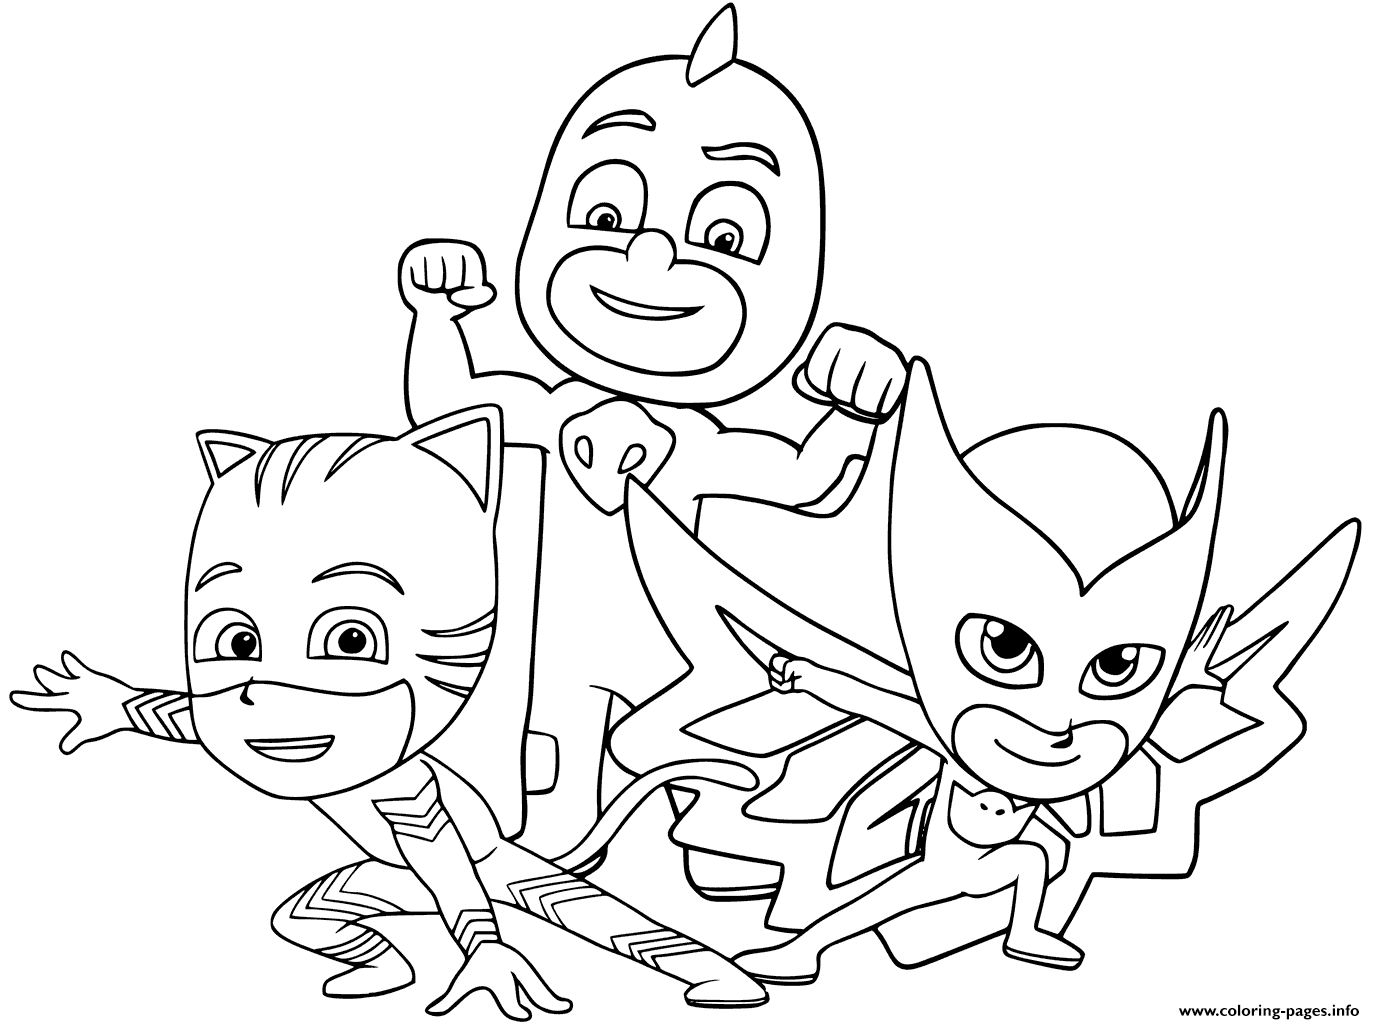 Super Hero Coloring Page Cartoon And Superheroes Coloring Pages Pj Masks Pj Maskss Super